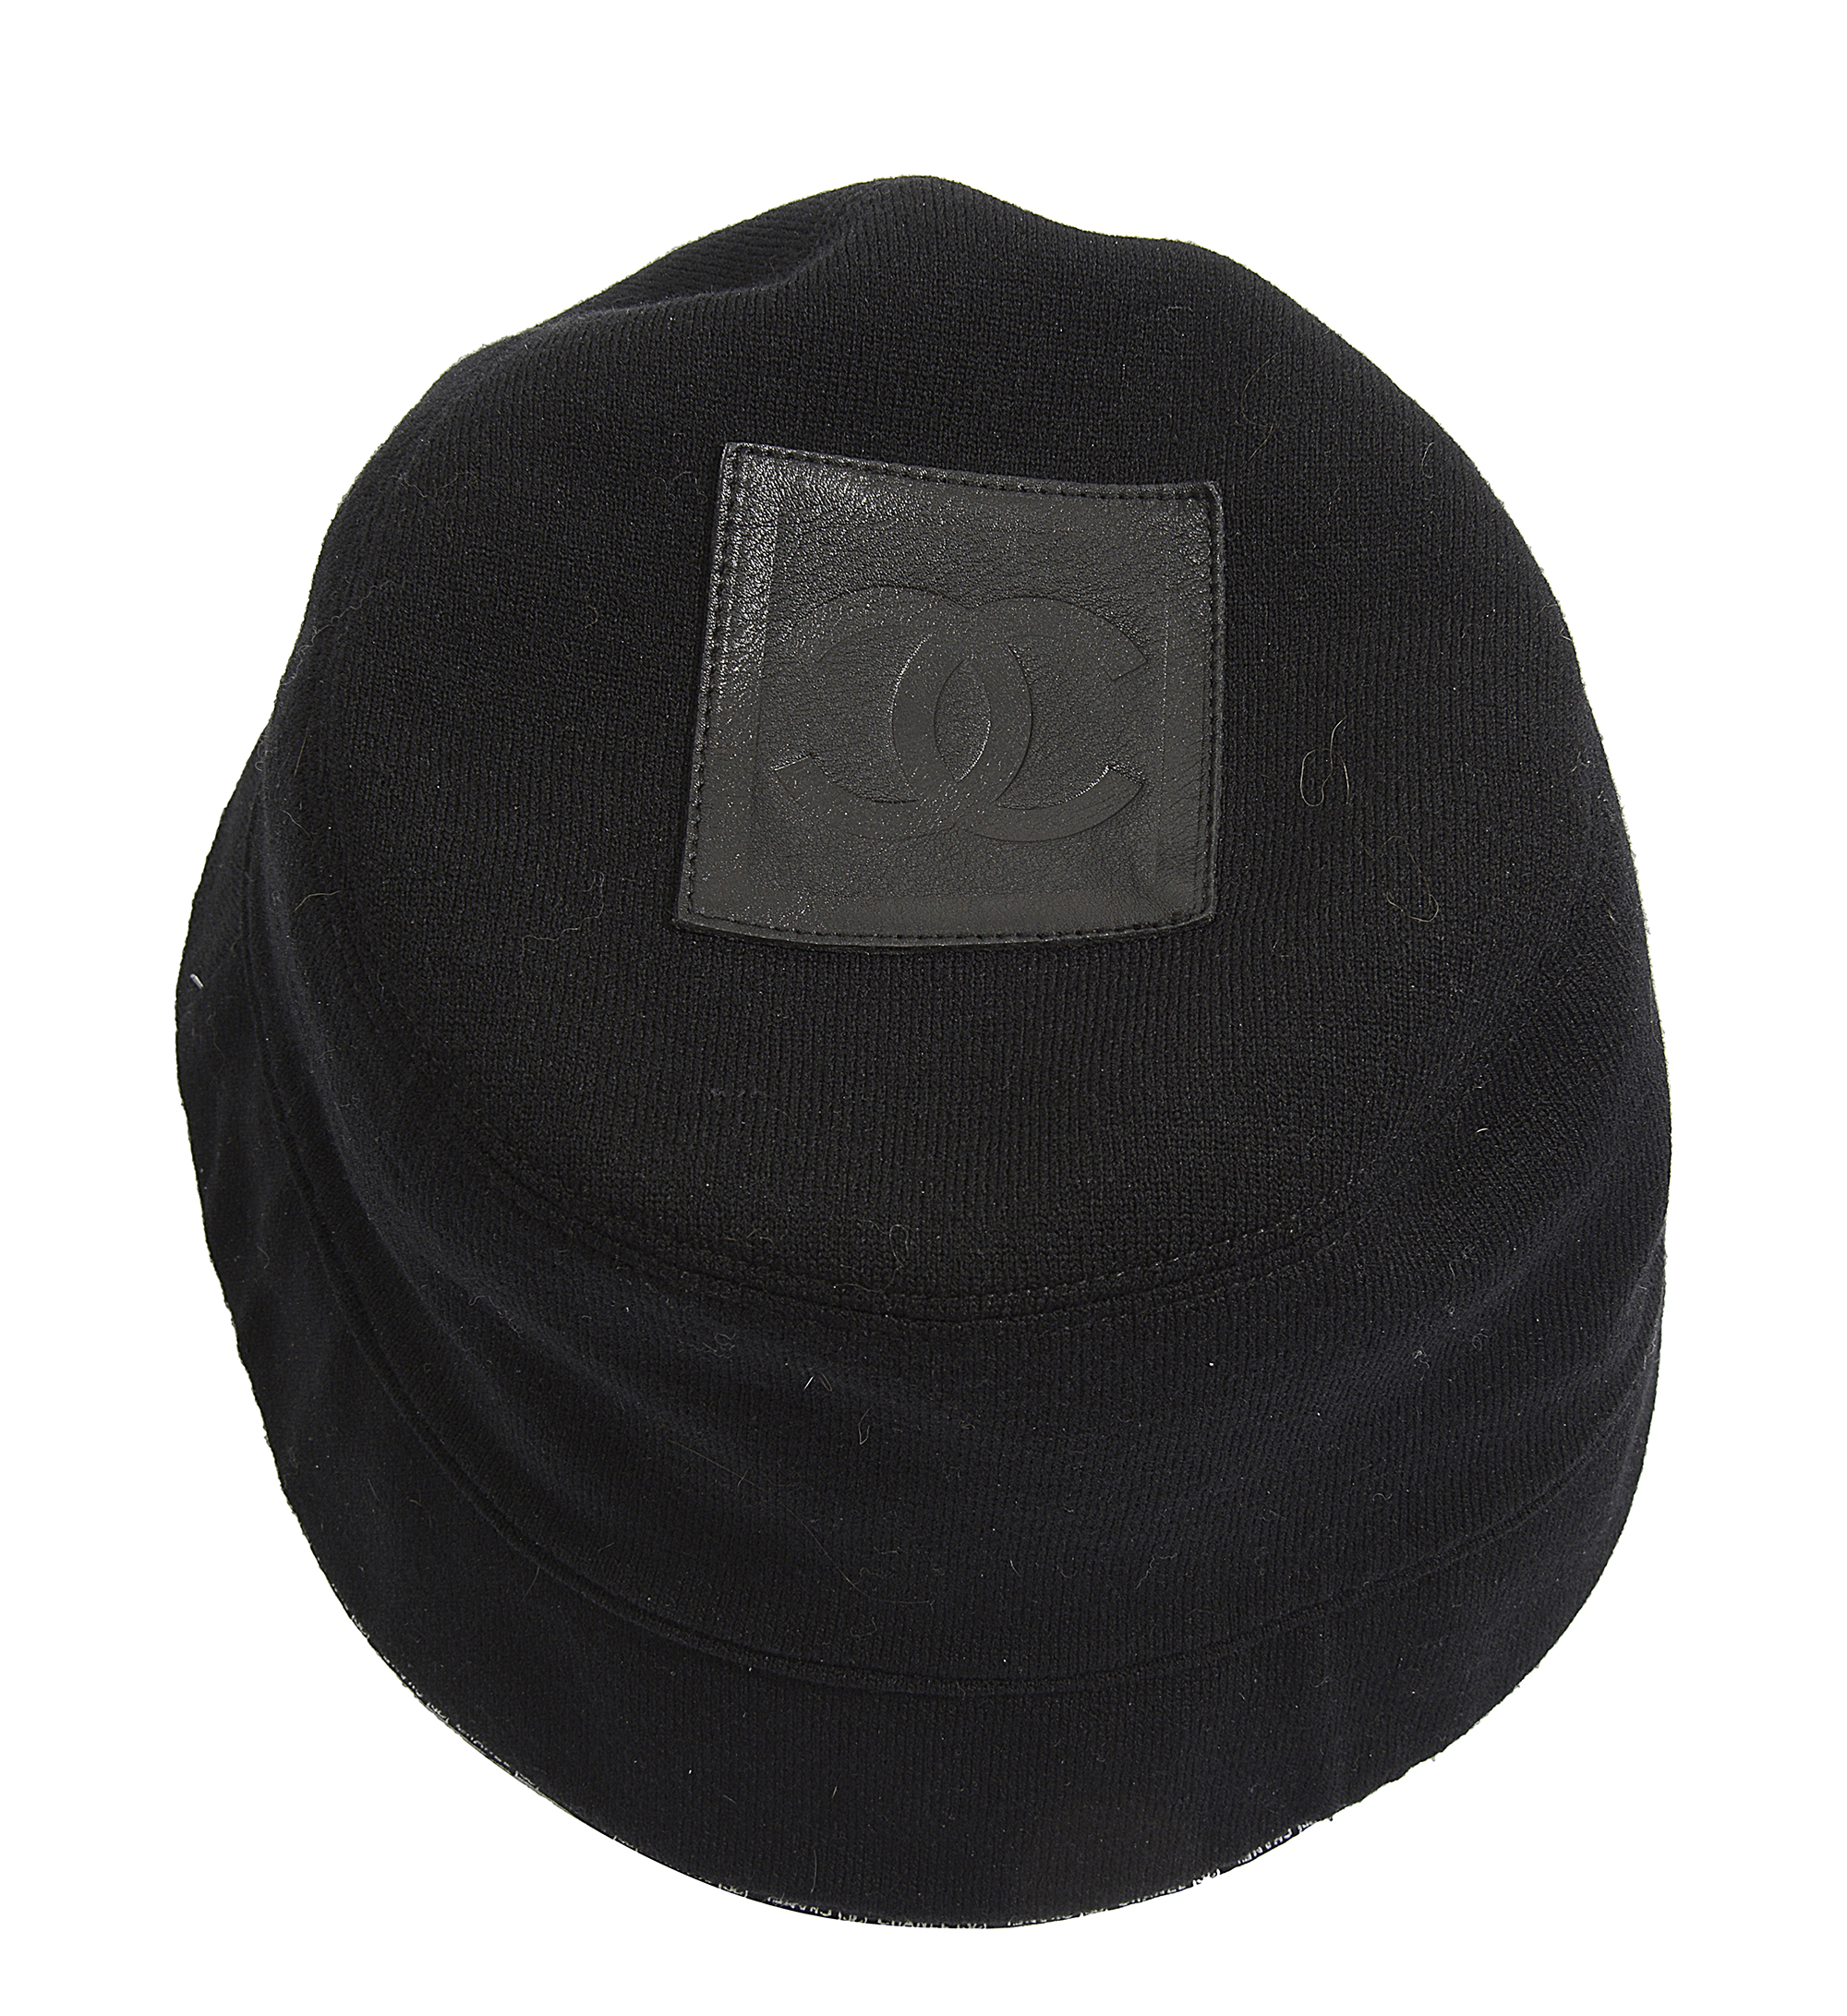 A Chanel black leather reversible CC logo hat - Image 2 of 3